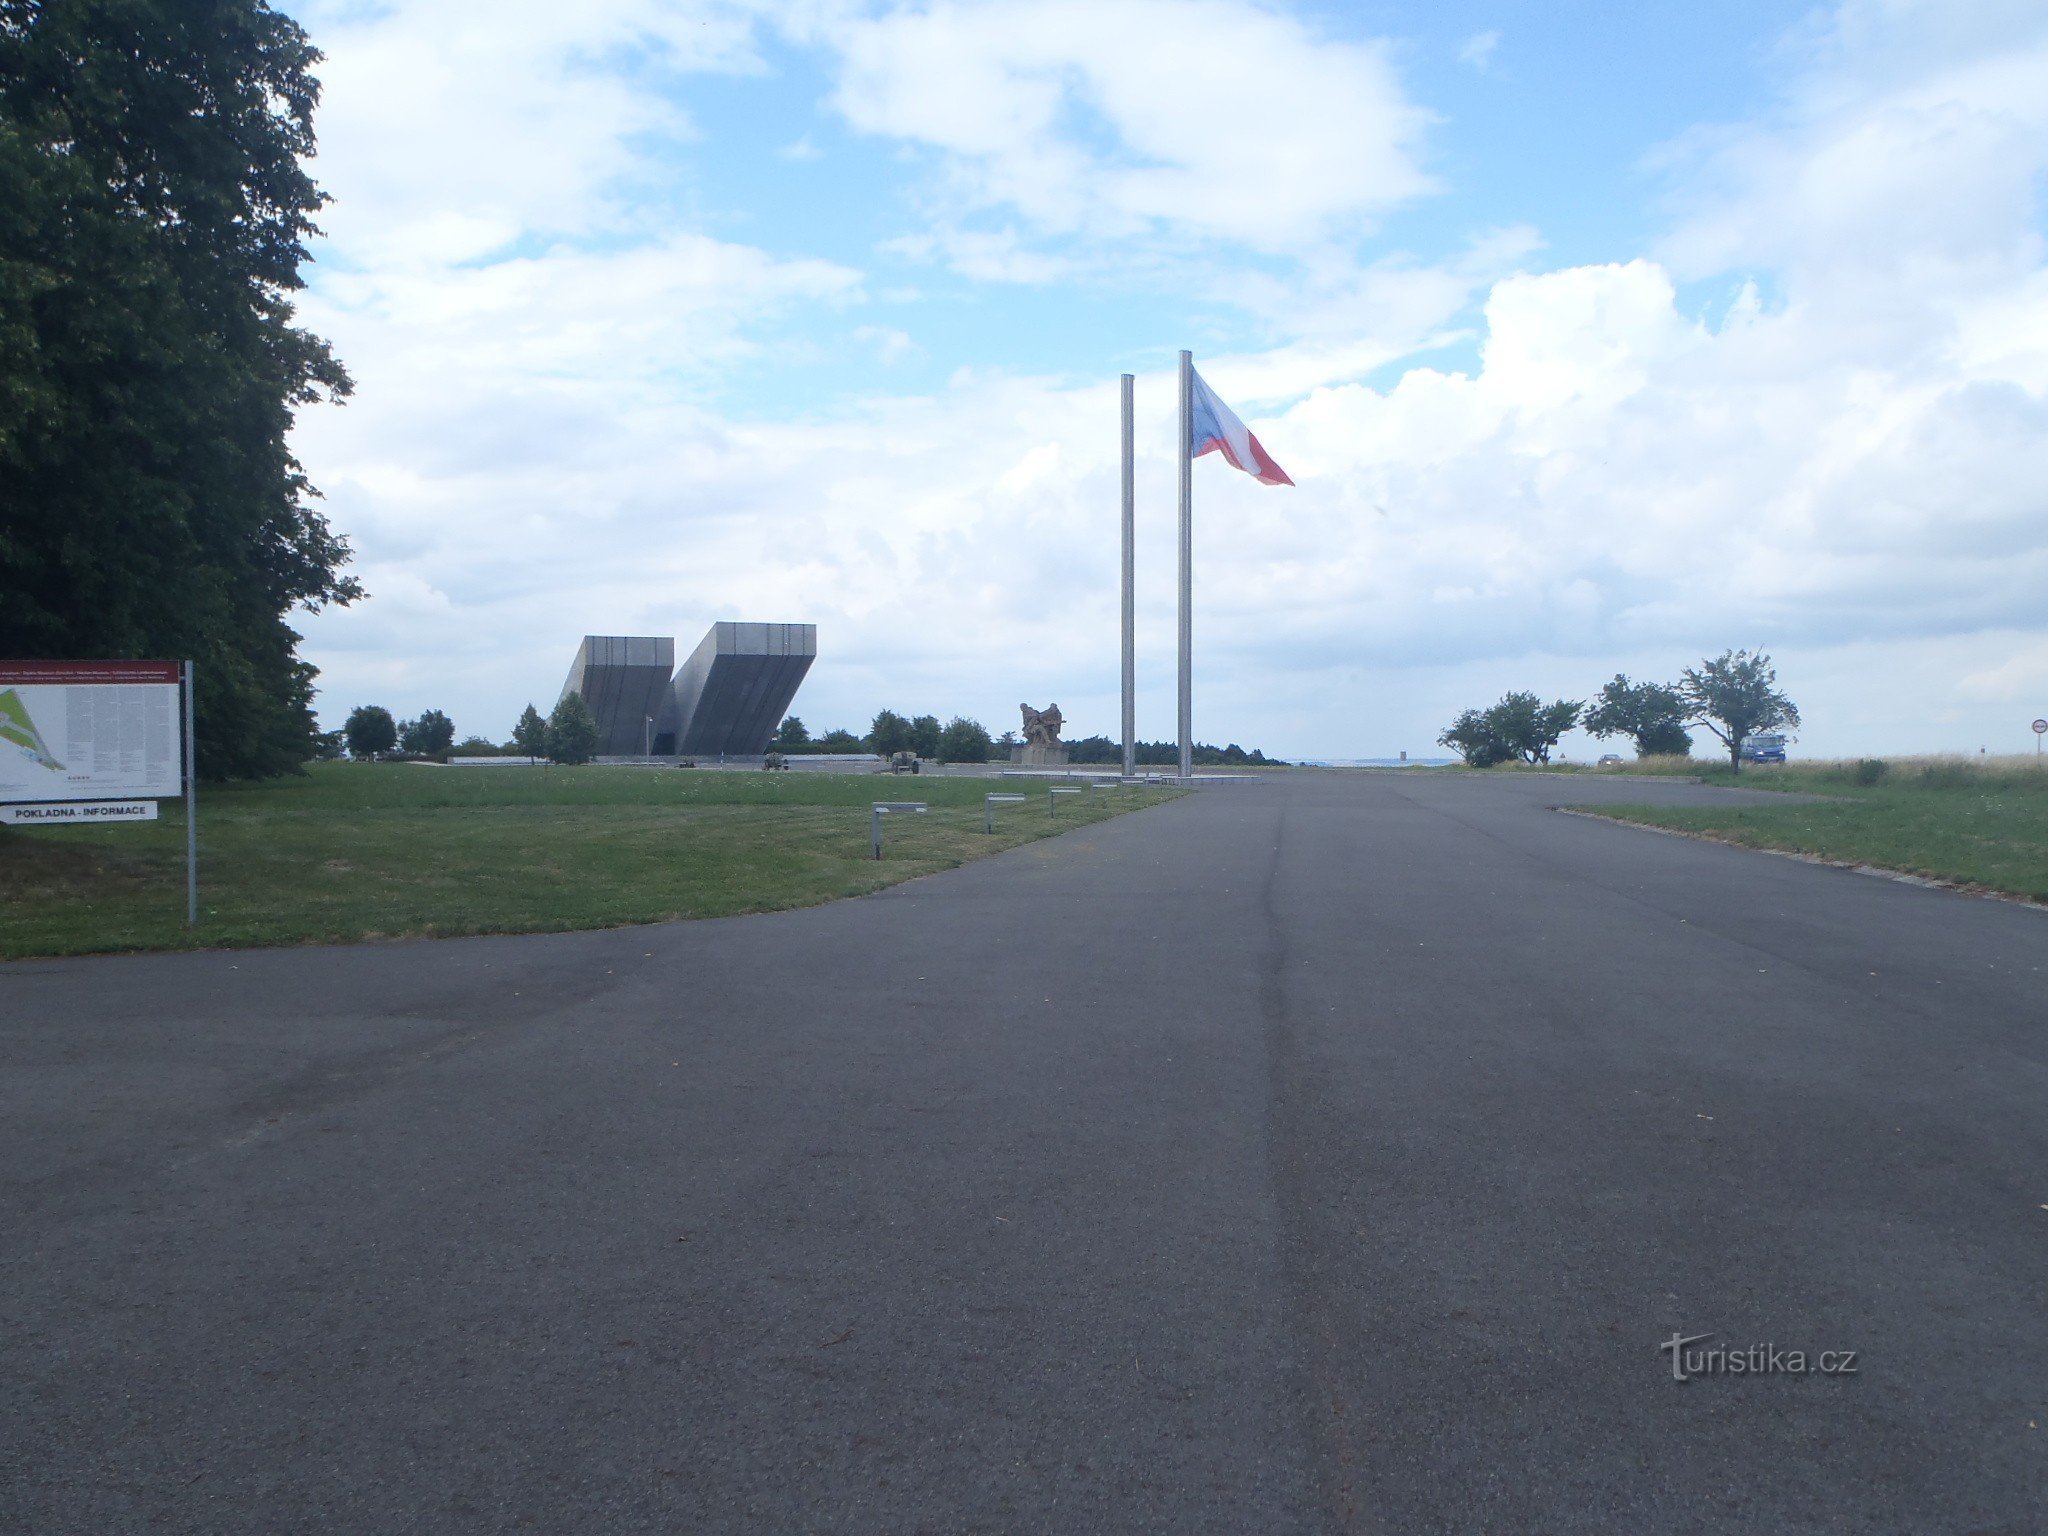 Monument from a distance